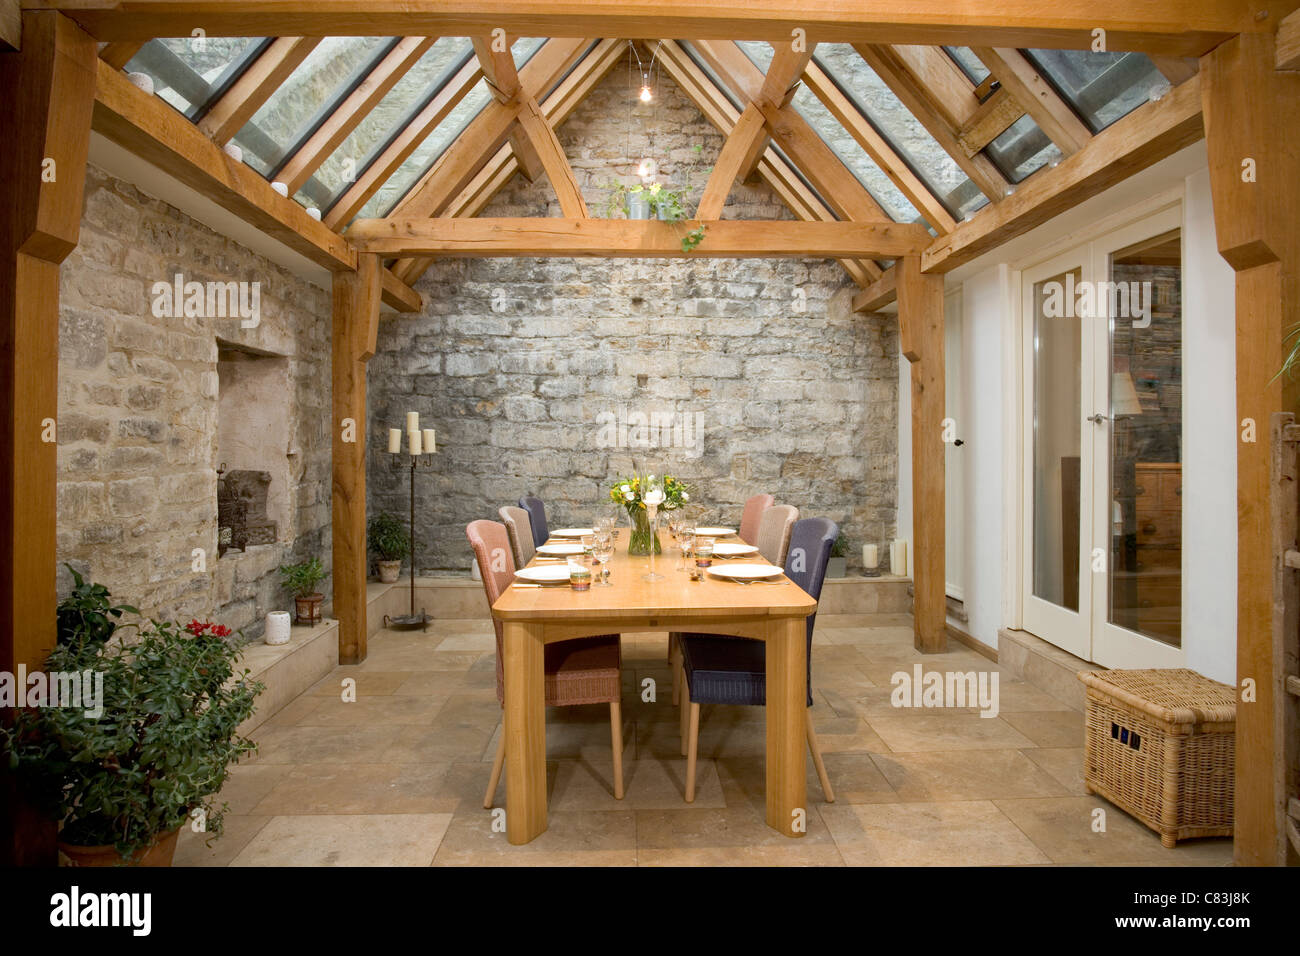 Contemporary oak framed glass roofed dining room. Stock Photo